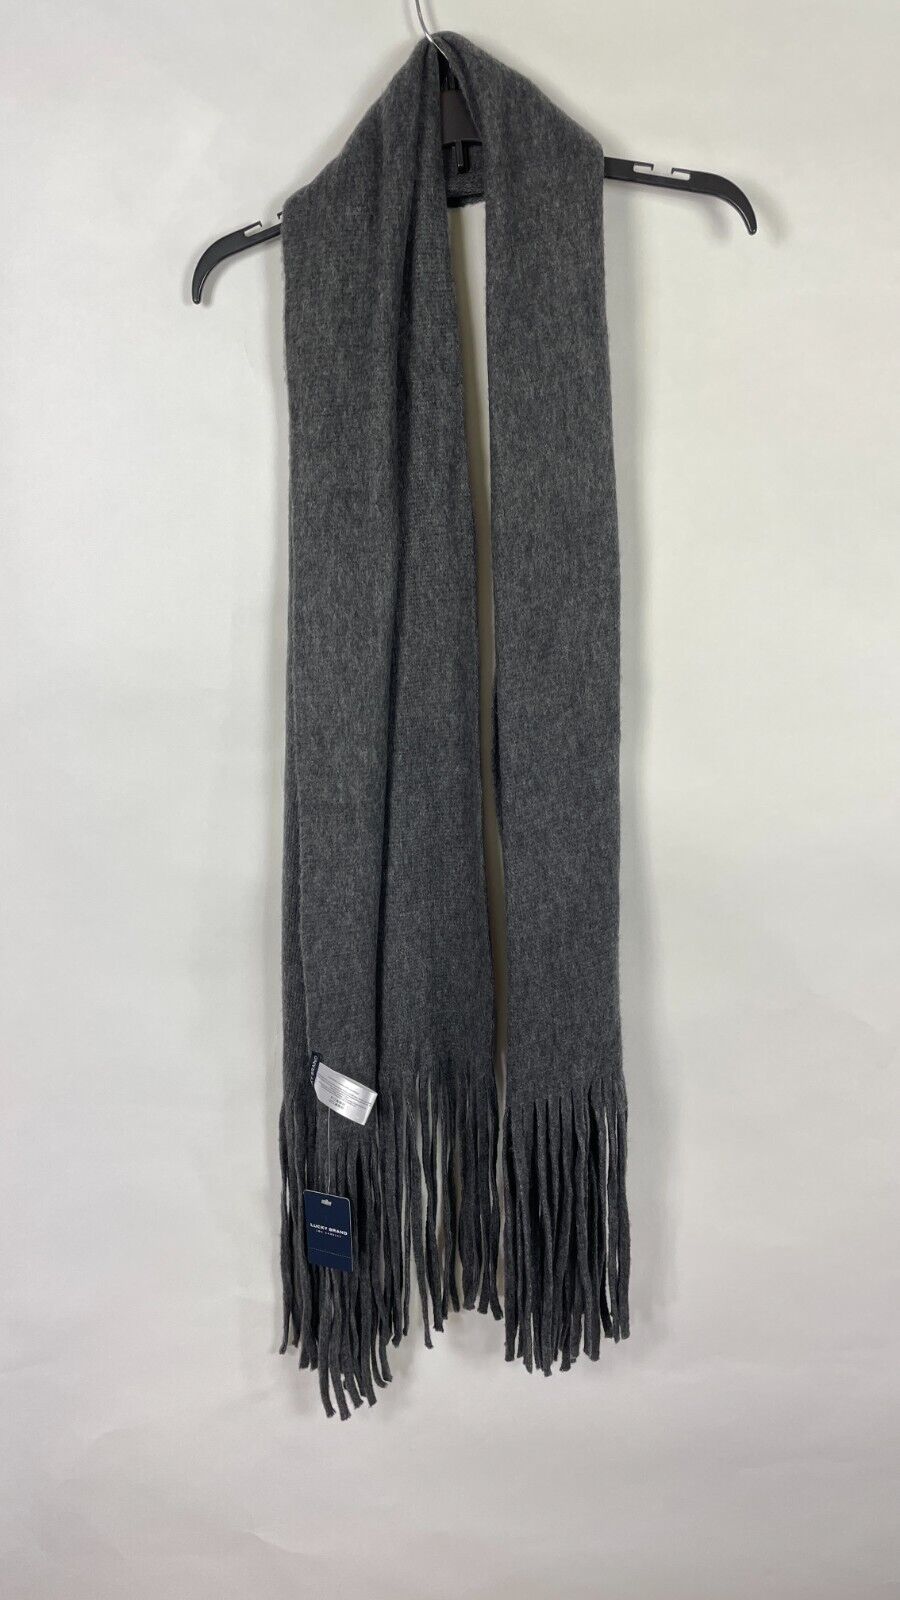 NWT Luck Brand Mens Scarf Tassels Gray One Size.